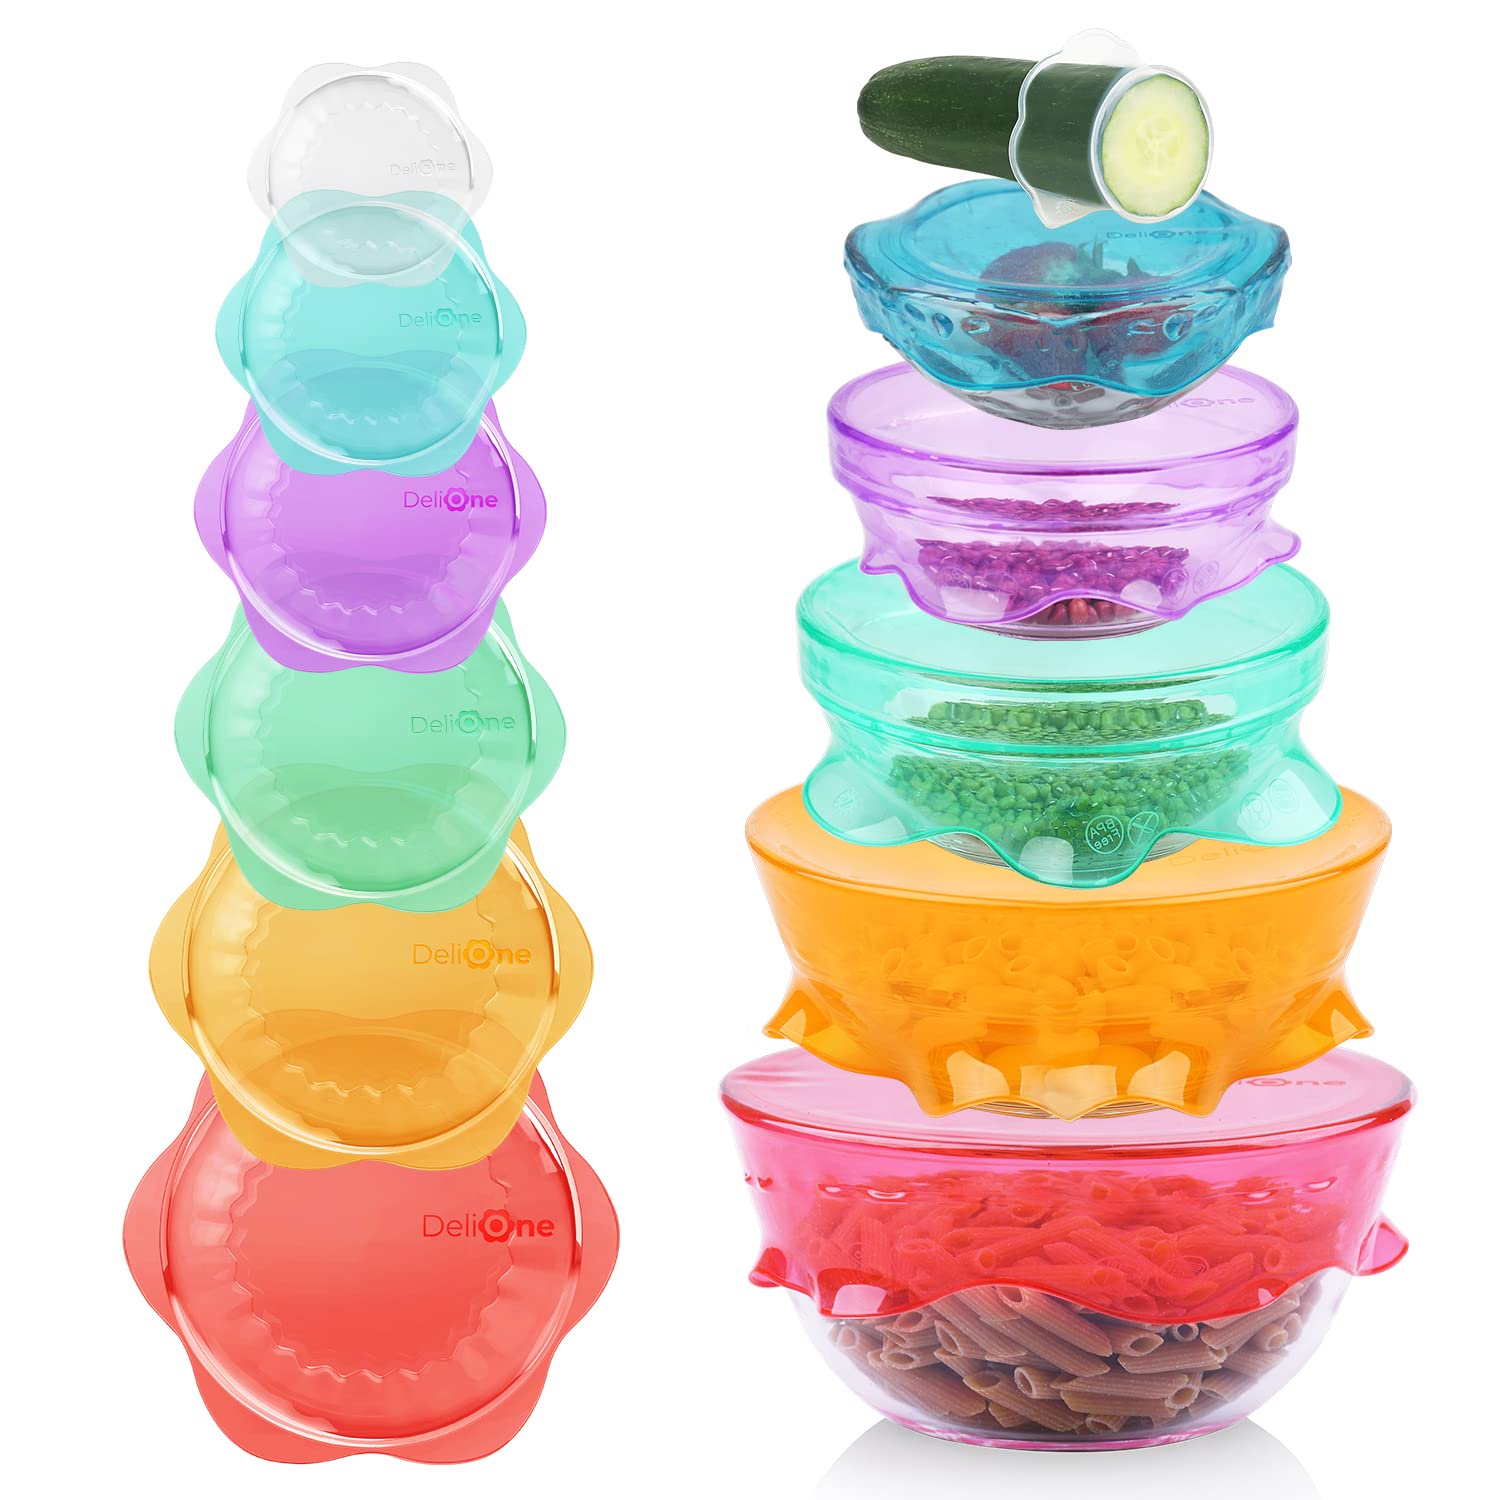 DeliOne Silicone Stretch Lids for Kitchen Food Storage – Durable,Reusable + Expandable Bowl Covers for Cup or Square Containers, Freezer, Microwave,and Dishwasher Safe,Mixing Size,Assorted Colors